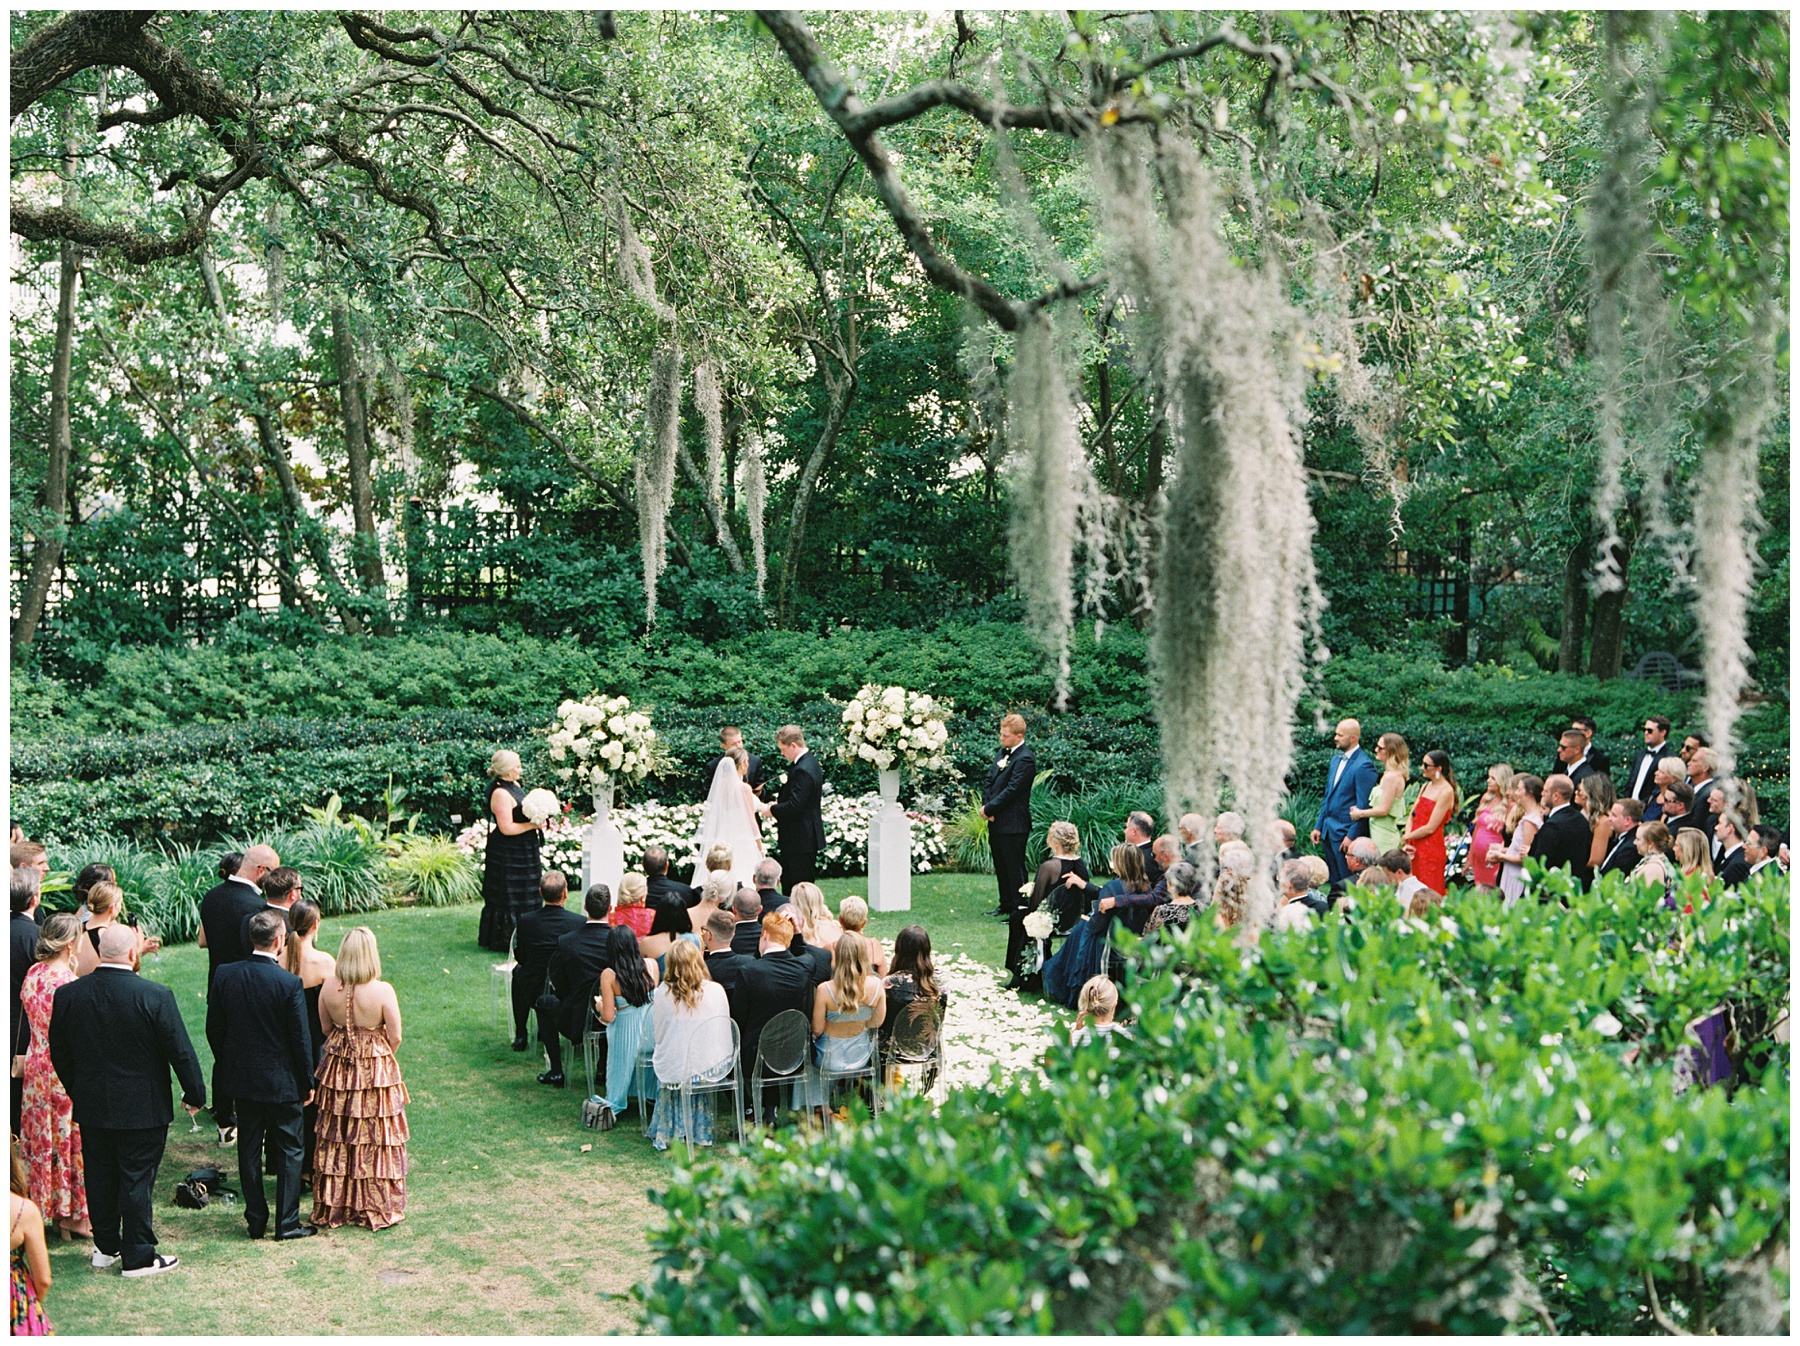 newlyweds change vows in garden under Spanish moss surrounded by white floral arrangements and white petals on lawn at the Governor Thomas Bennett House